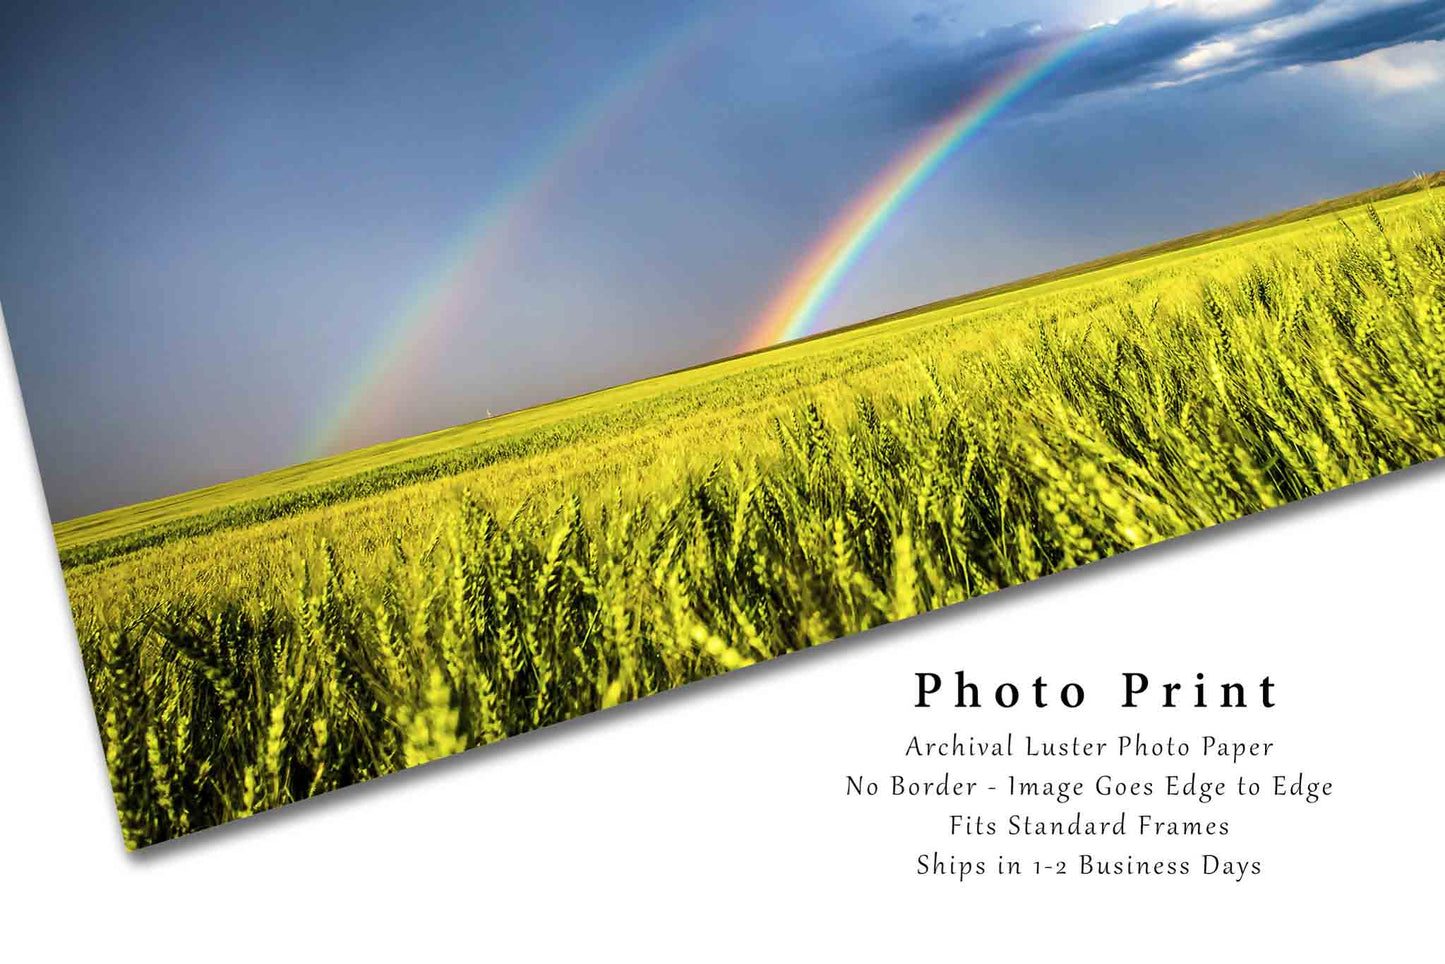 Country Photography Print (Not Framed) Picture of Double Rainbow Over Wheat Field on Stormy Day in Kansas Great Plains Wall Art Nature Decor